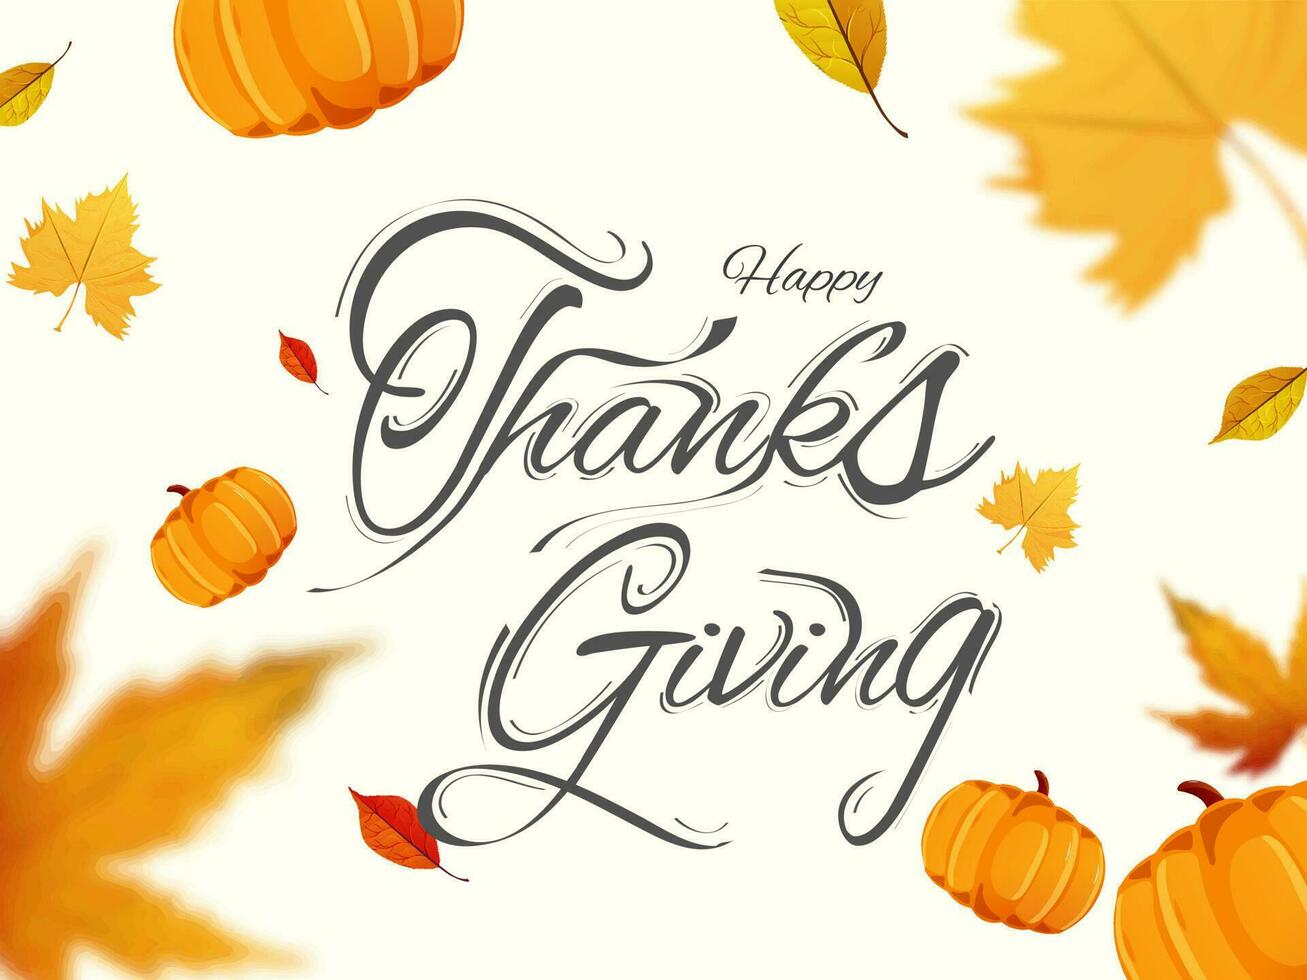 Calligraphy of Happy Thanksgiving with pumpkin and autumn leaves decorated on white background. Can be used as greeting card design. vector